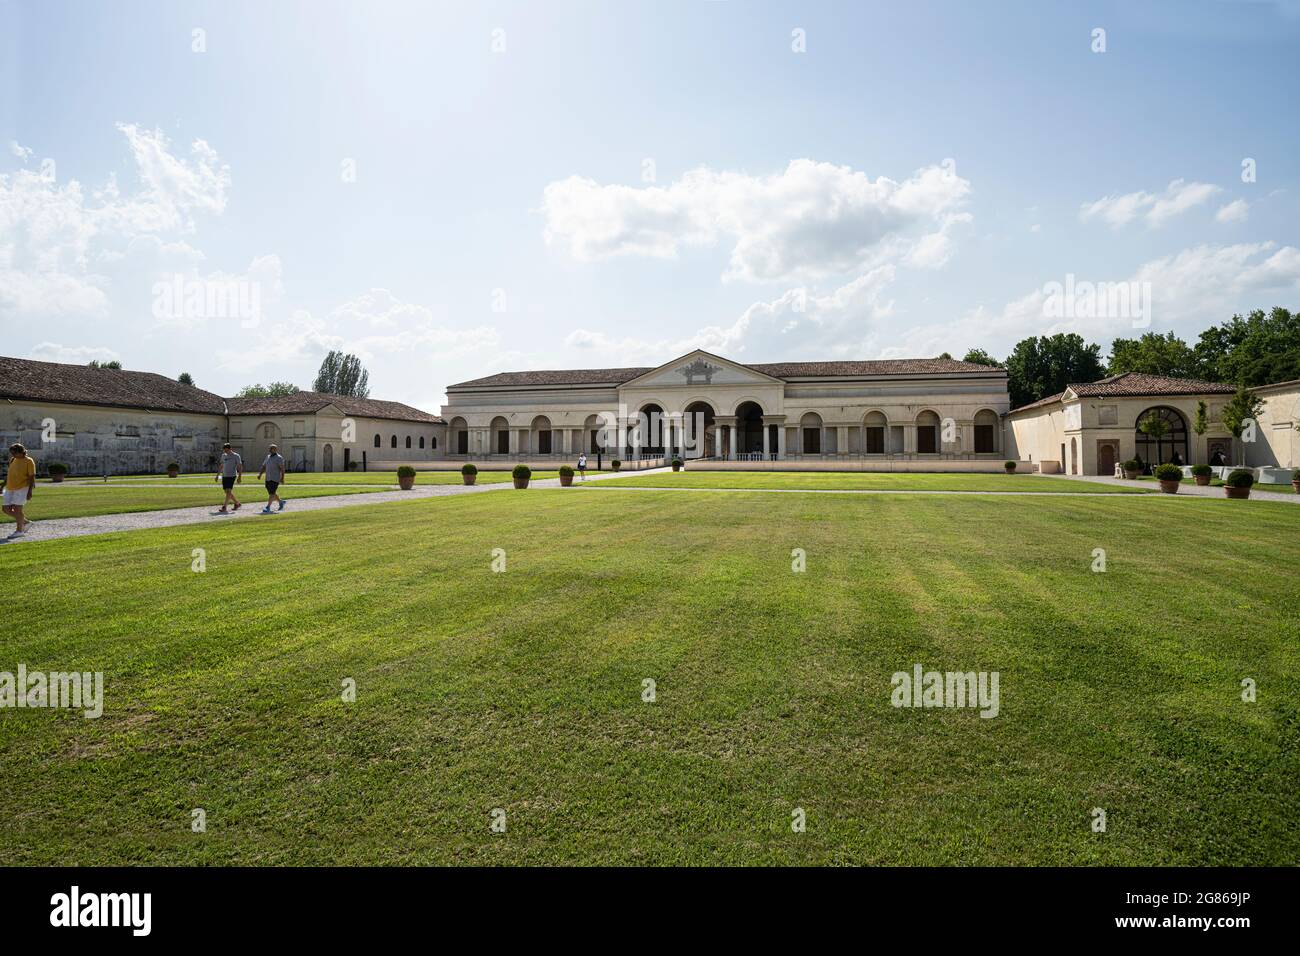 Mantua, Italy. July 13, 2021.   view of the inner courtyard of the Te palace Stock Photo